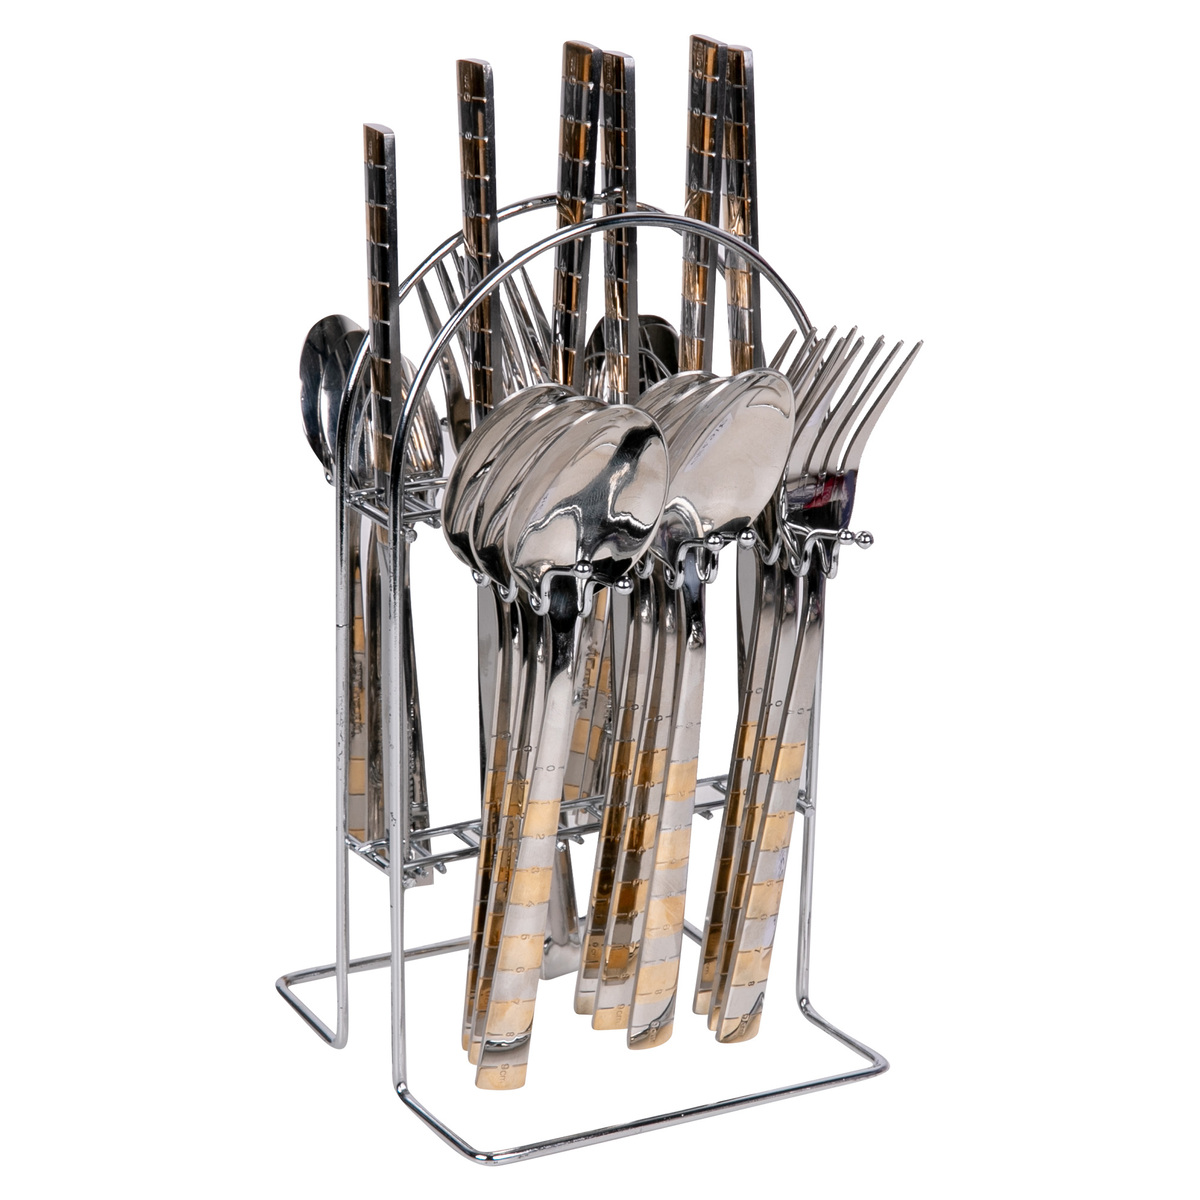 Chefline Stainless Steel Cutlery + Stand GOLD 3MKT 24Pcs